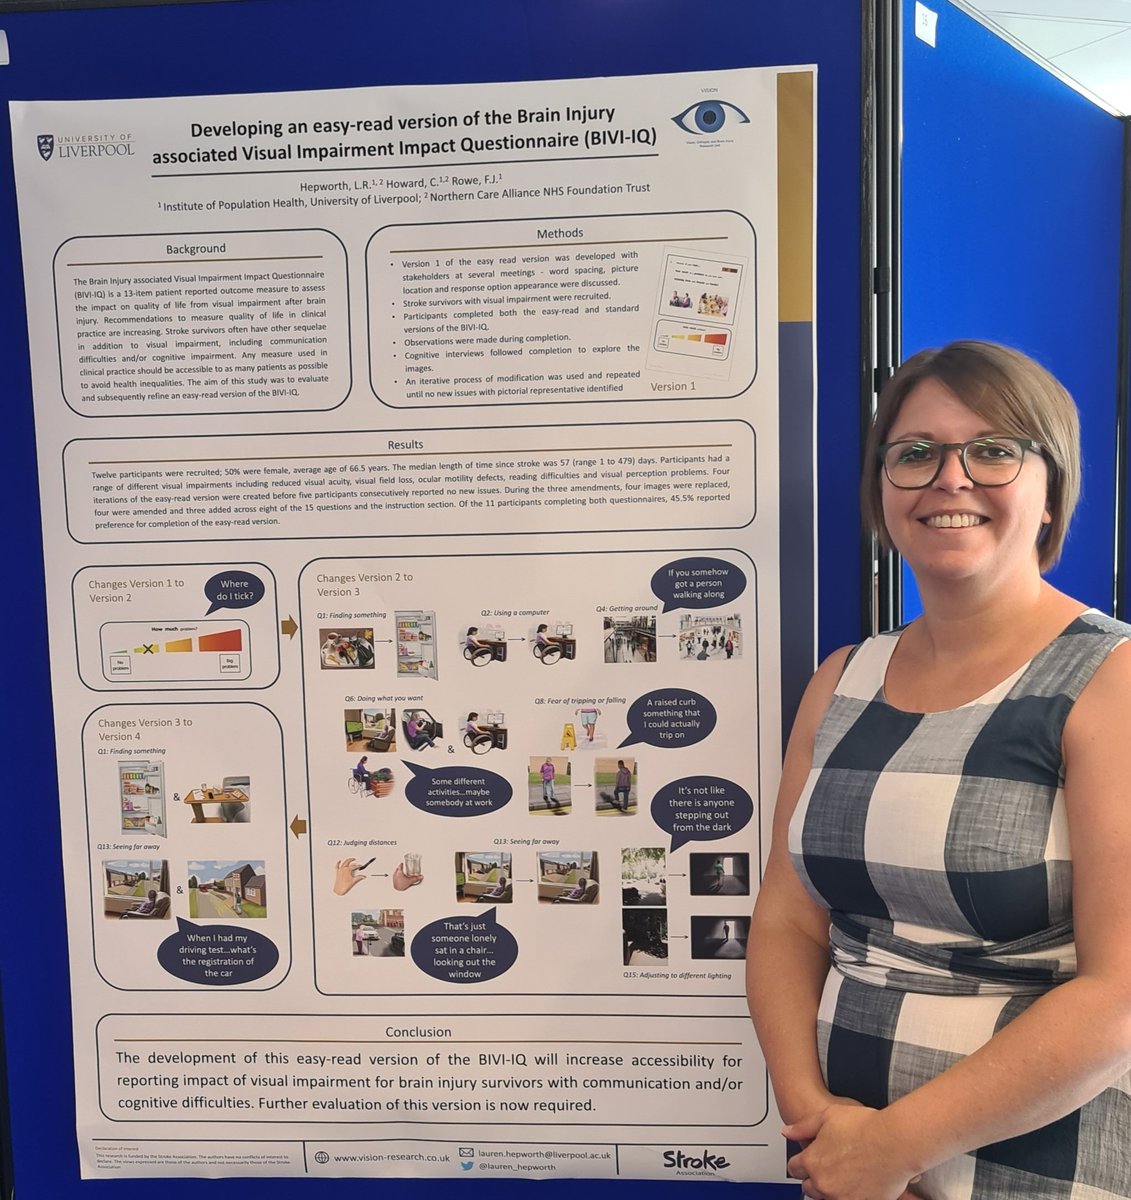 Presenting the development of an #EasyRead #AphasiaFriendly version of #BrainInjury associated #VisualImpairment Impact Questionnaire (BIVI-IQ) today at #UKPROMS  @TheStrokeAssoc @livPCMH @LivUniIPH @biosstrokeneuro @OrthoptResearch